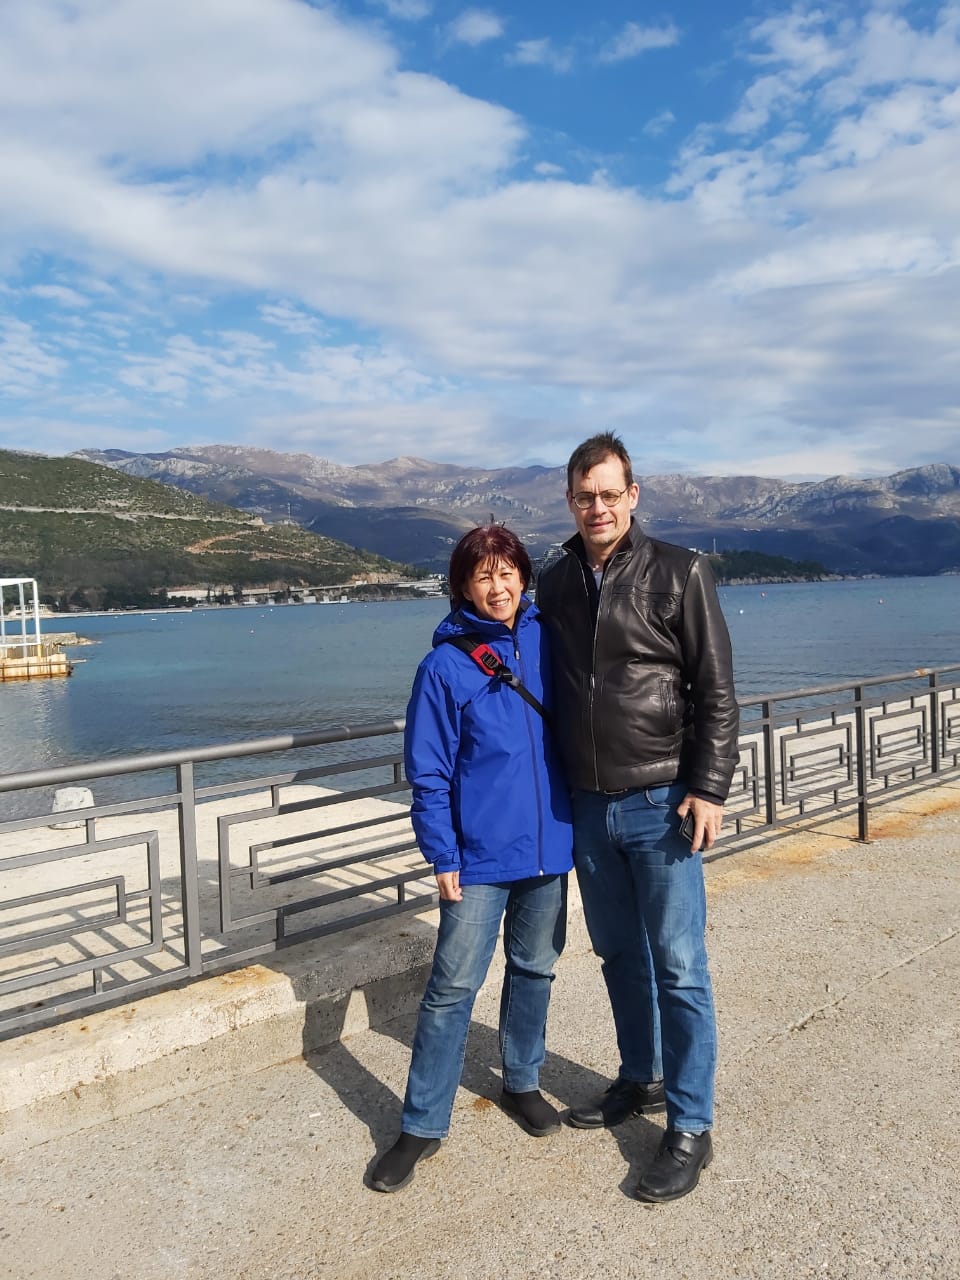 Arriving in Budva Montenegro as missionaries in March 2020. 